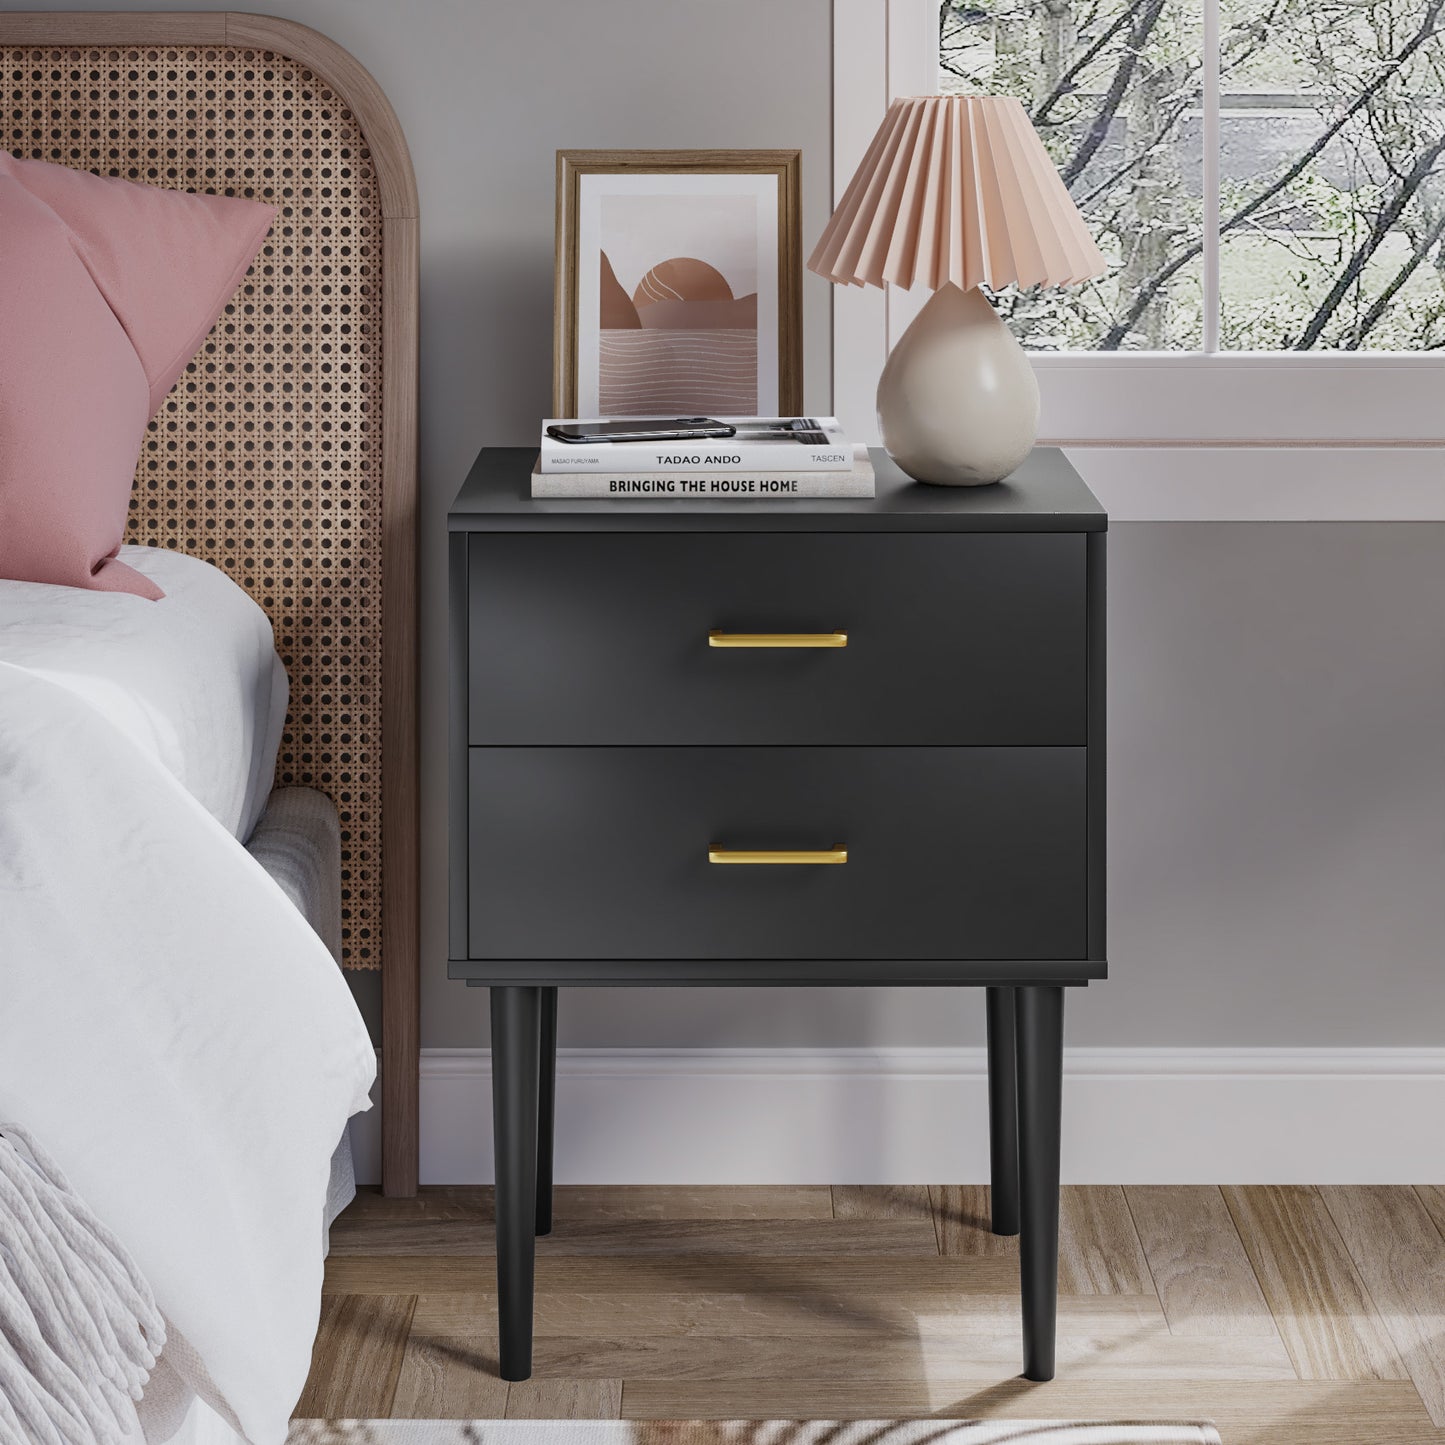 Smuxee Classic Nightstand with 2 Drawer Black Bedside Table for Bedrooms